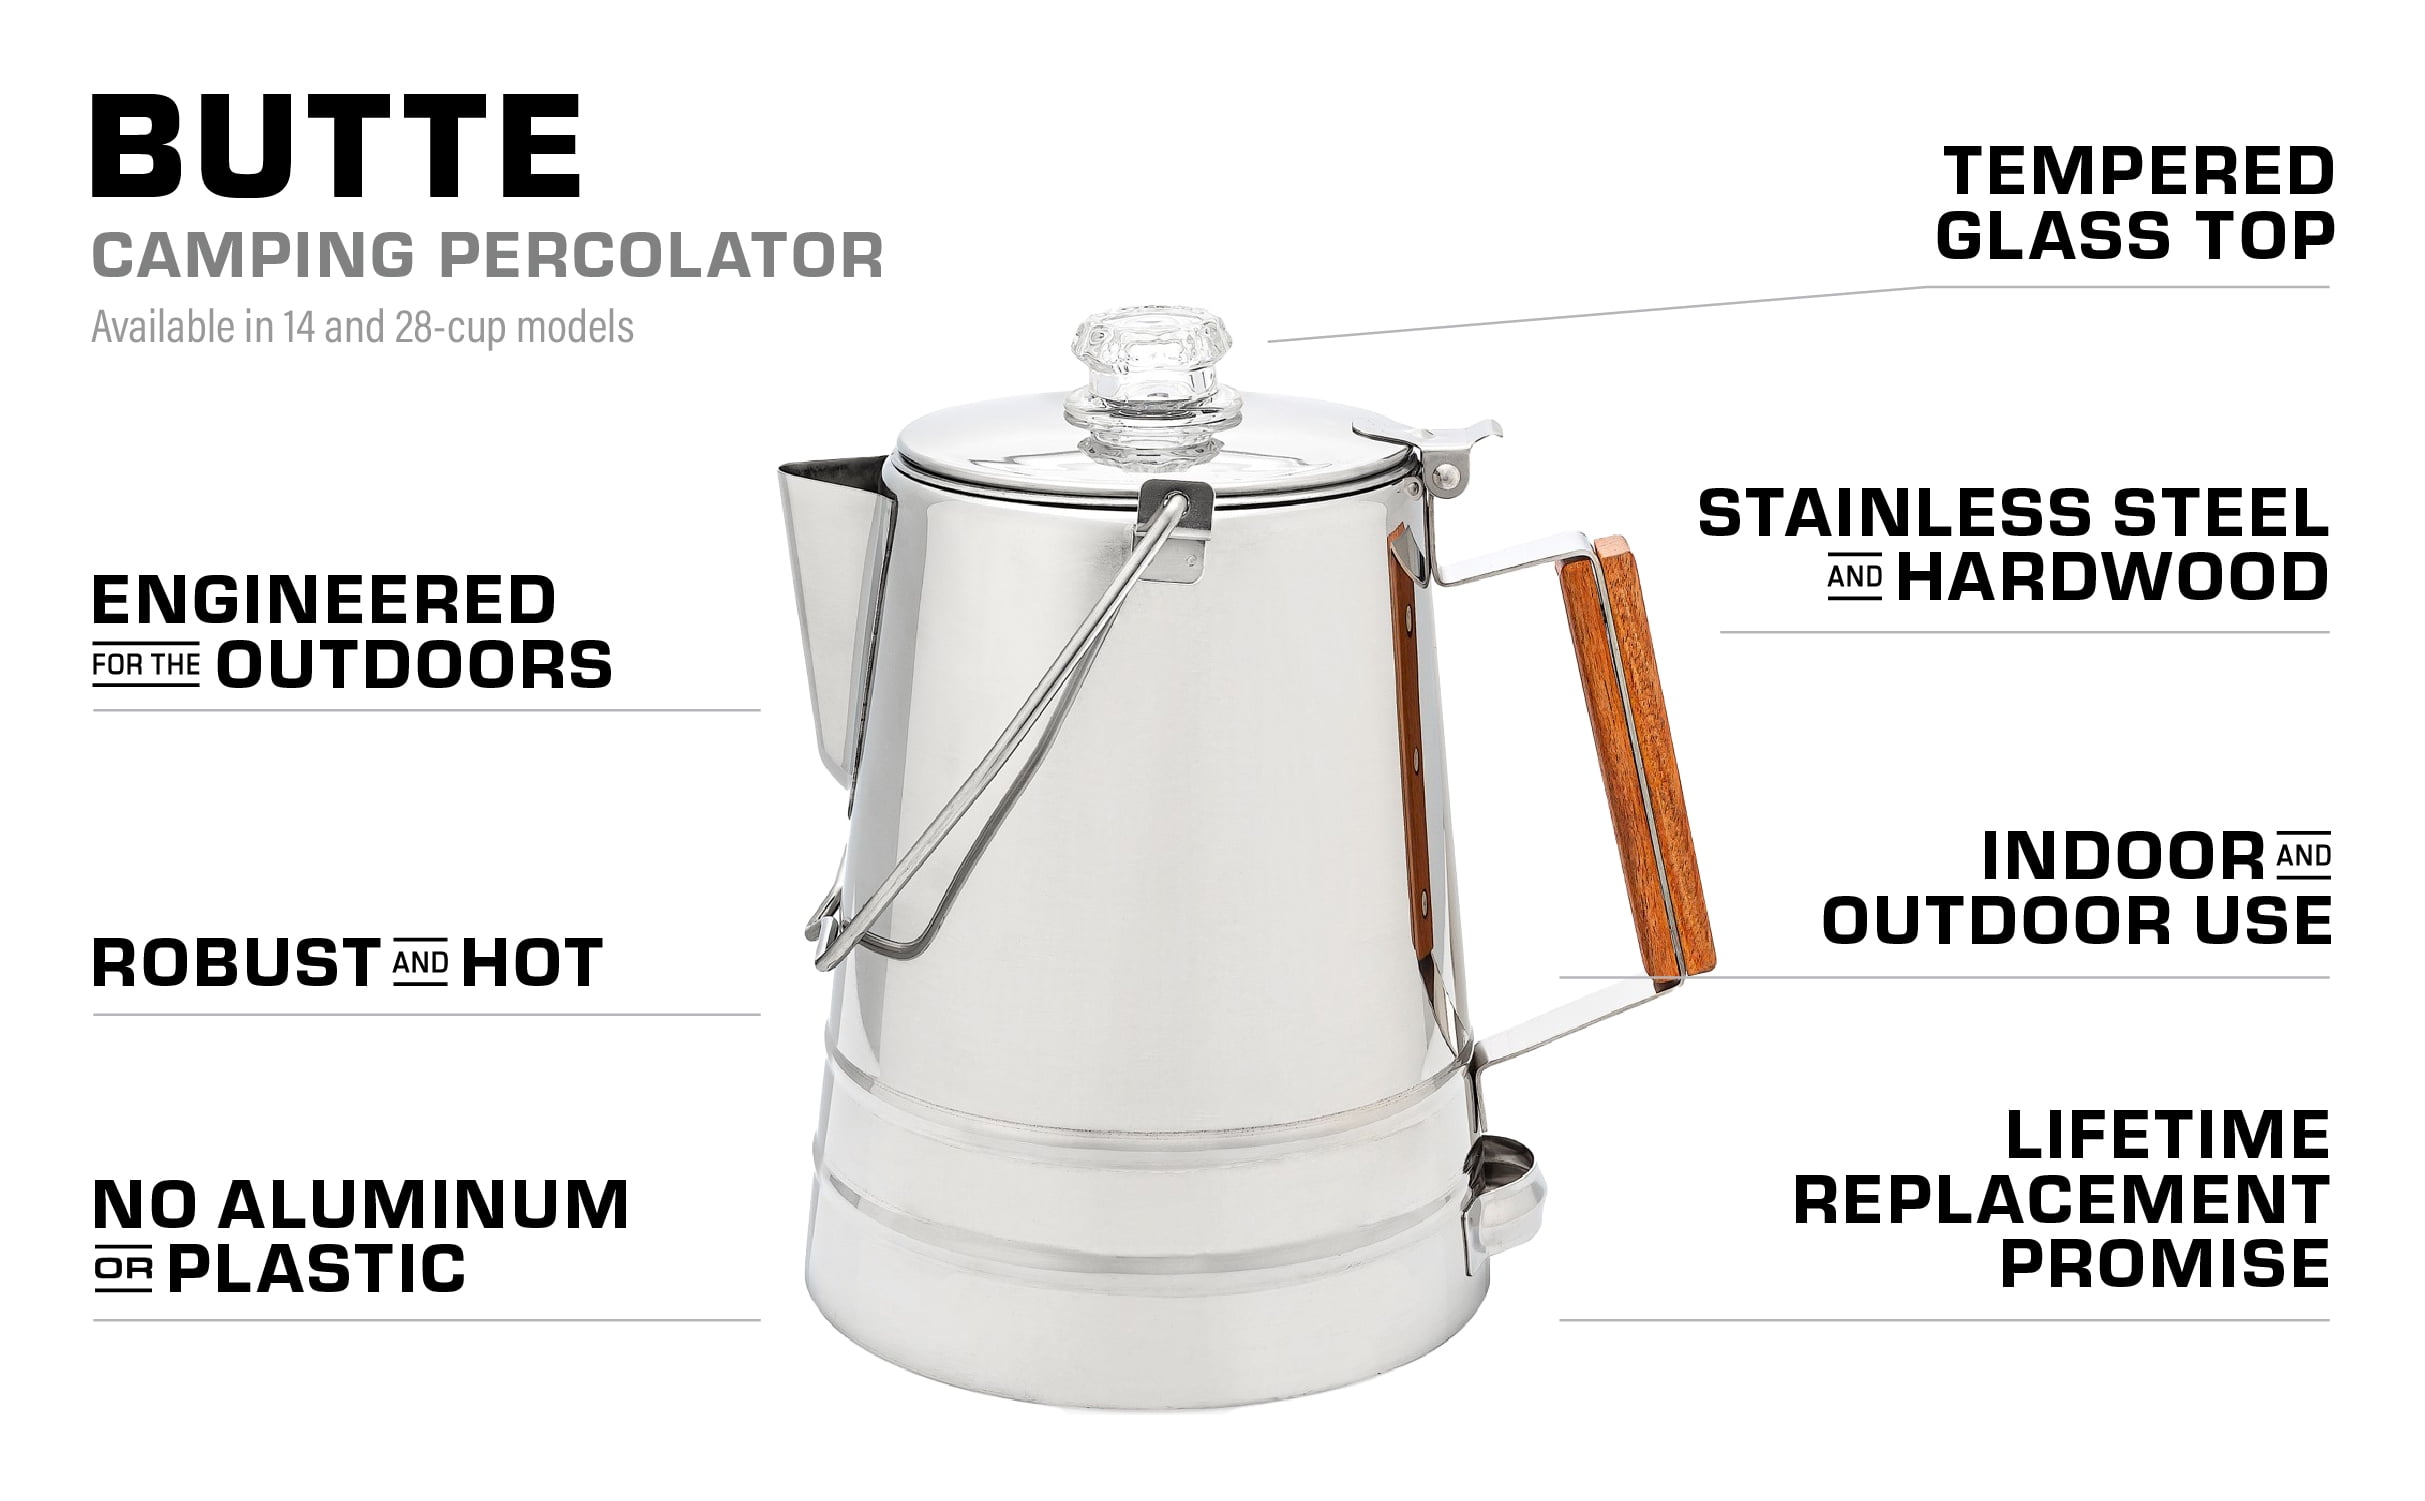 COLETTI Scoutmaster Camping Coffee Pot - Campfire Coffee Pot - Huge  Stainless Steel Camp Coffee Maker for Groups – 24 CUP 